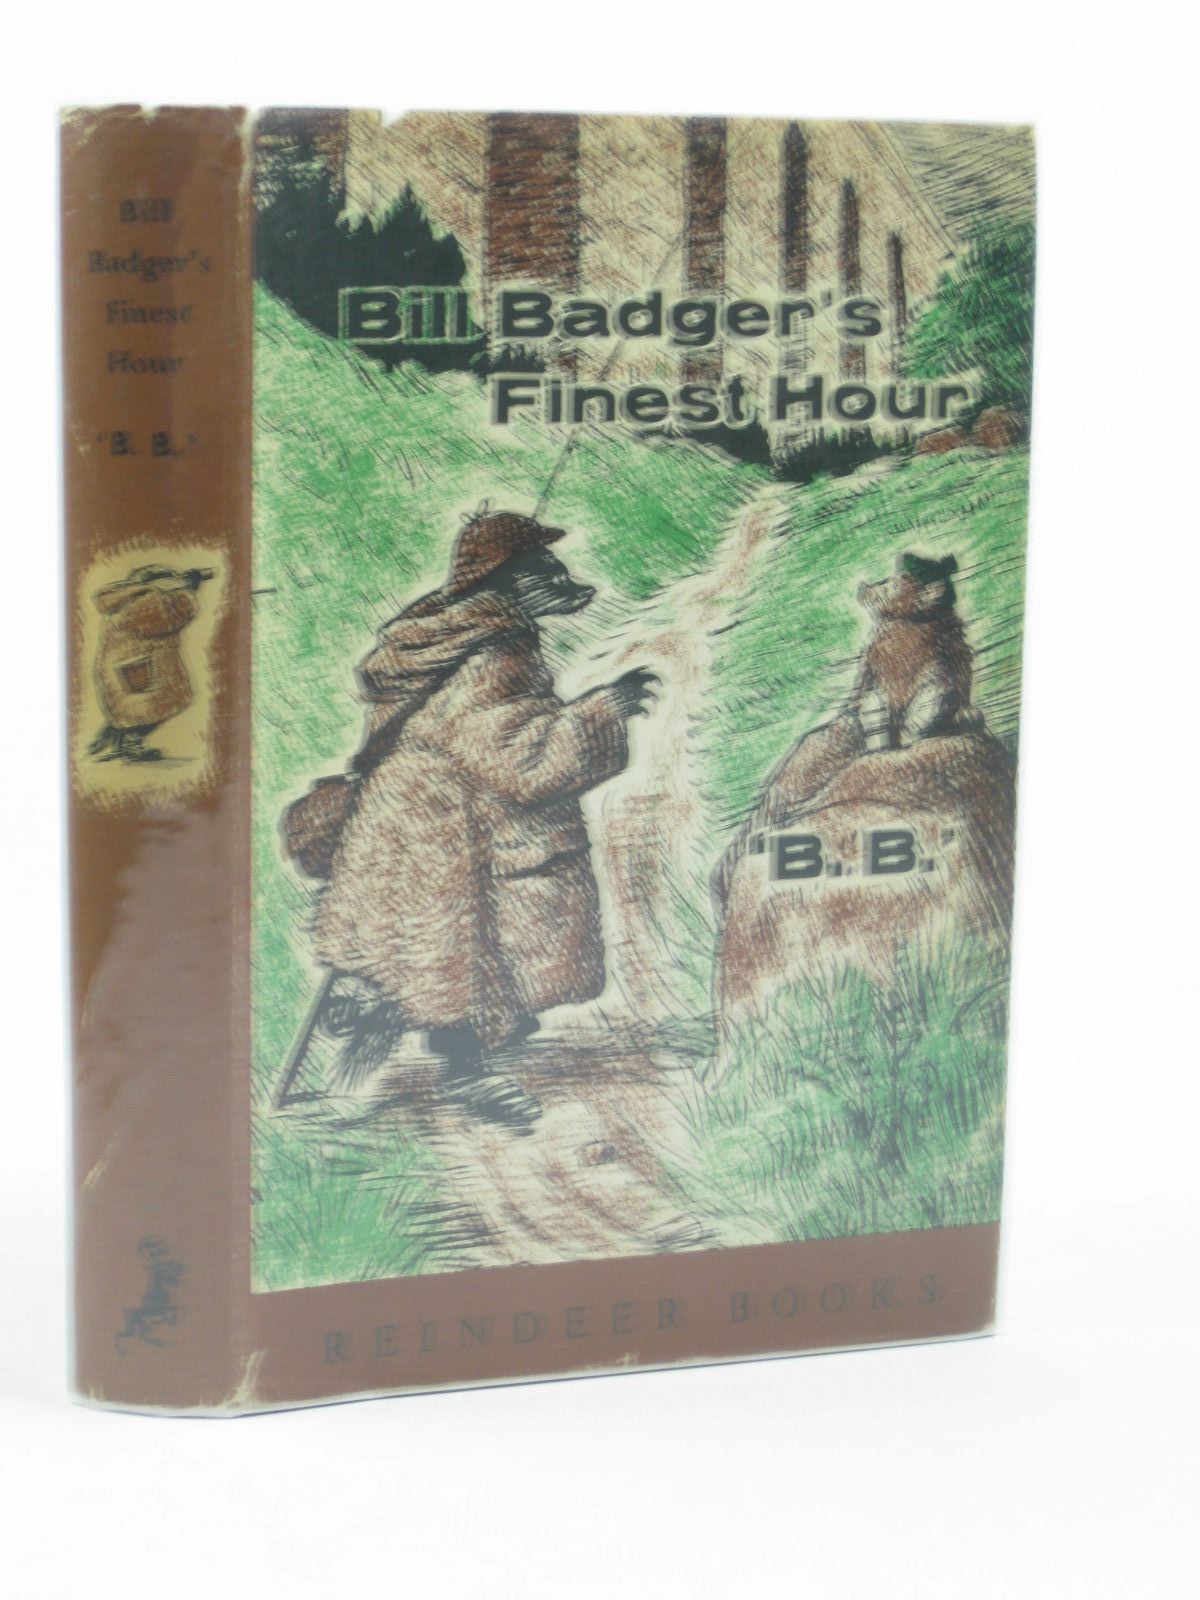 Cover of BILL BADGER'S FINEST HOUR by  BB